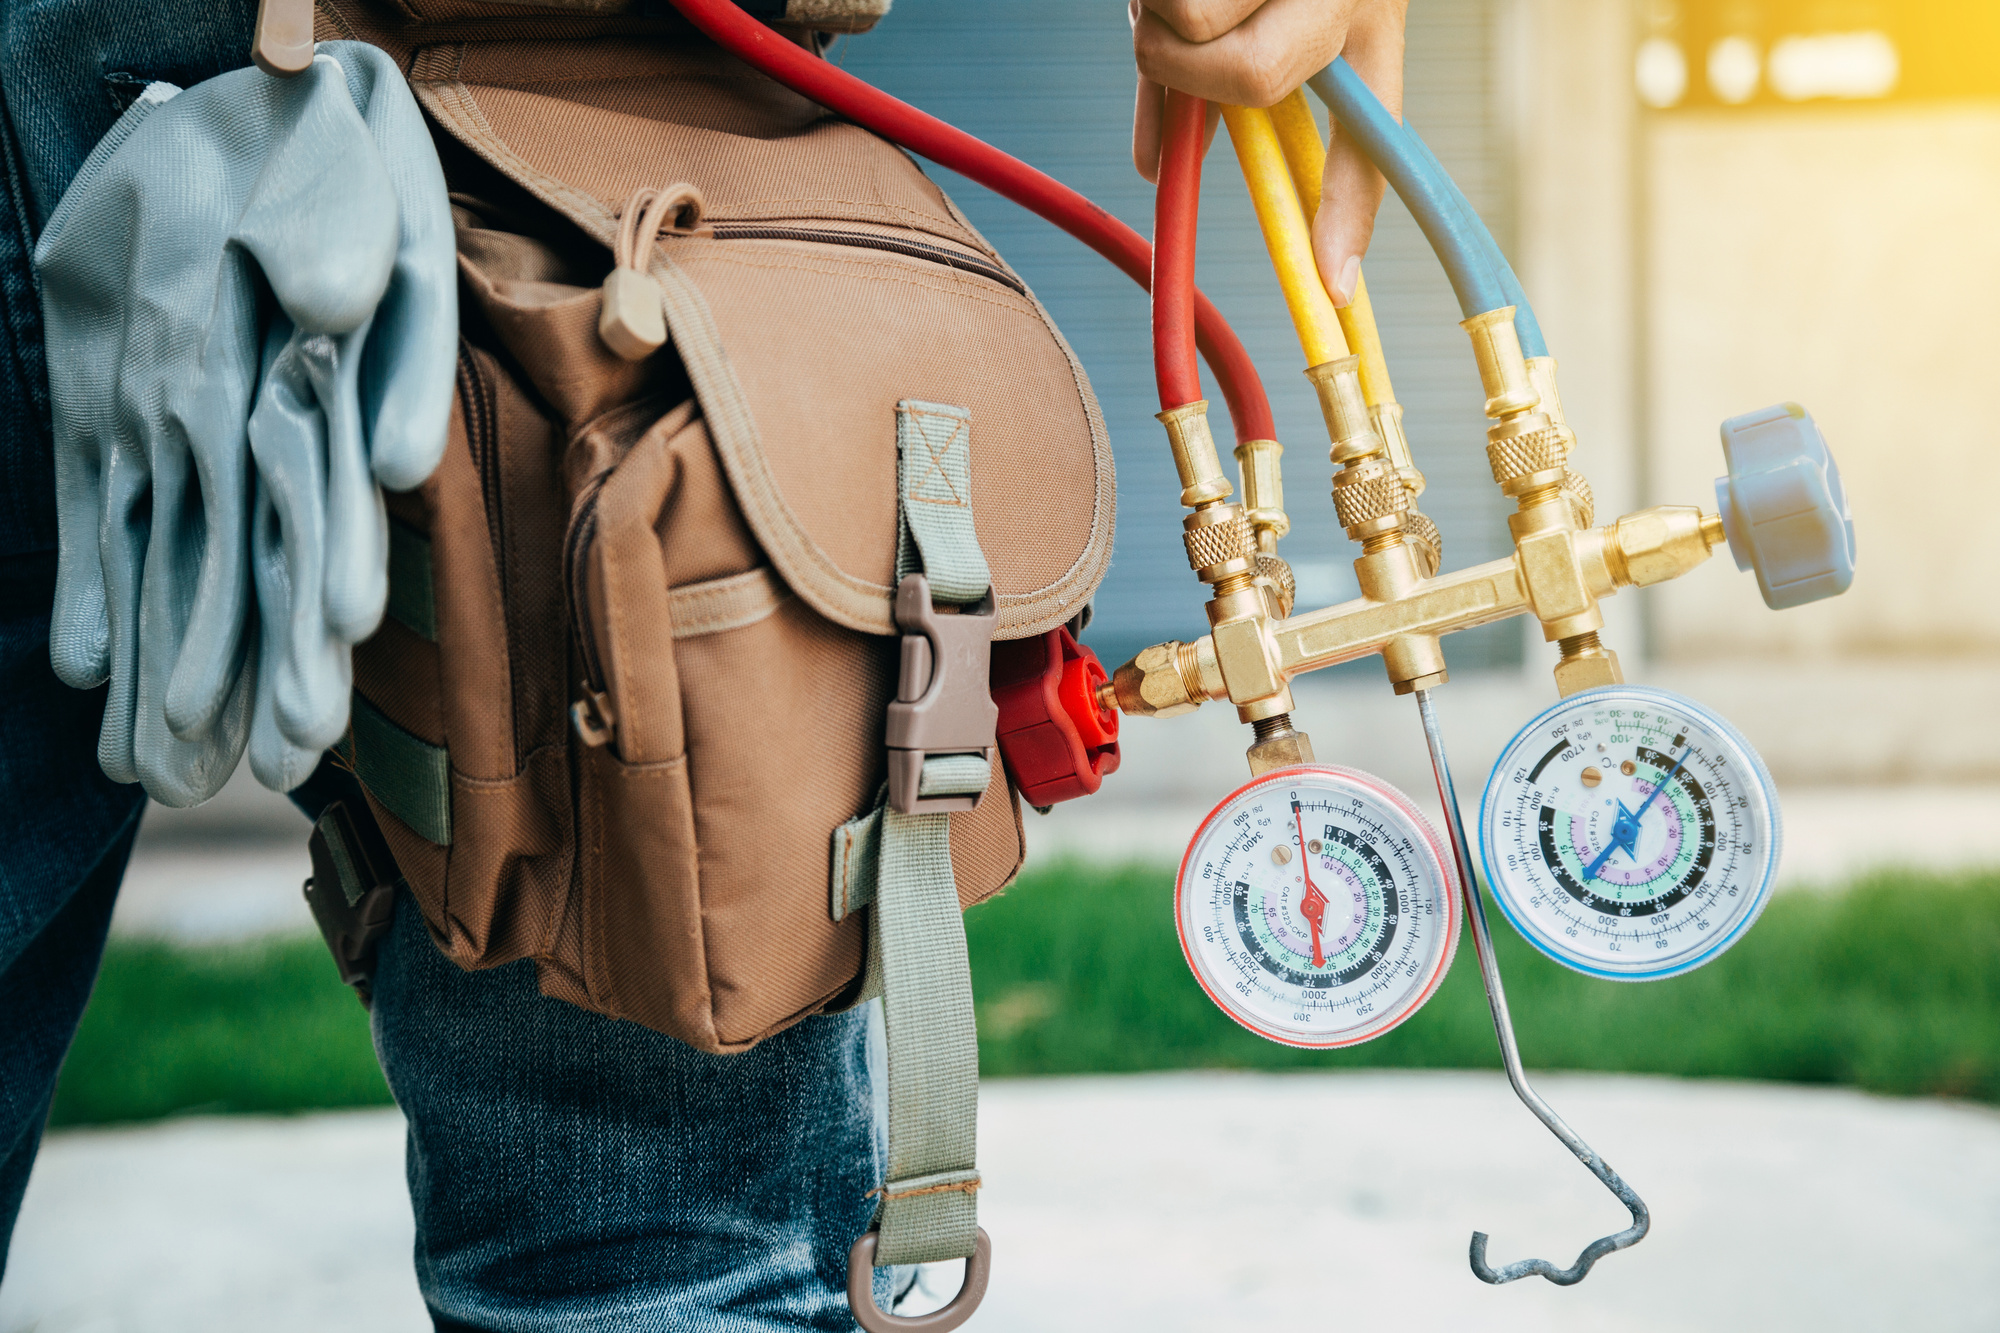 Do you know about the common HVAC problems you should be looking out for as a homeowner? If not, then here are just a few.